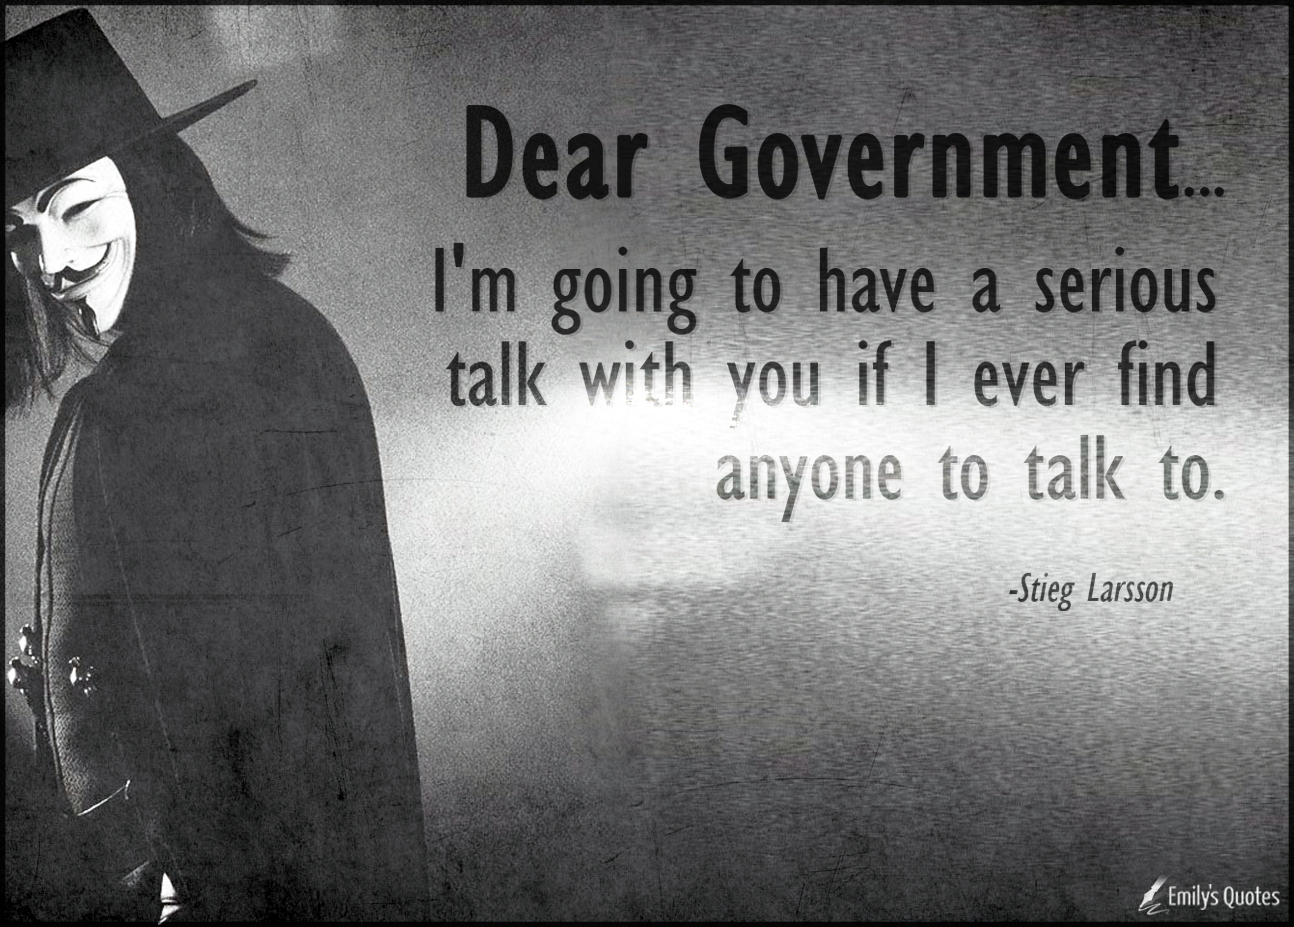 Dear Government… I’m going to have a serious talk with you if I ever find anyone to talk to